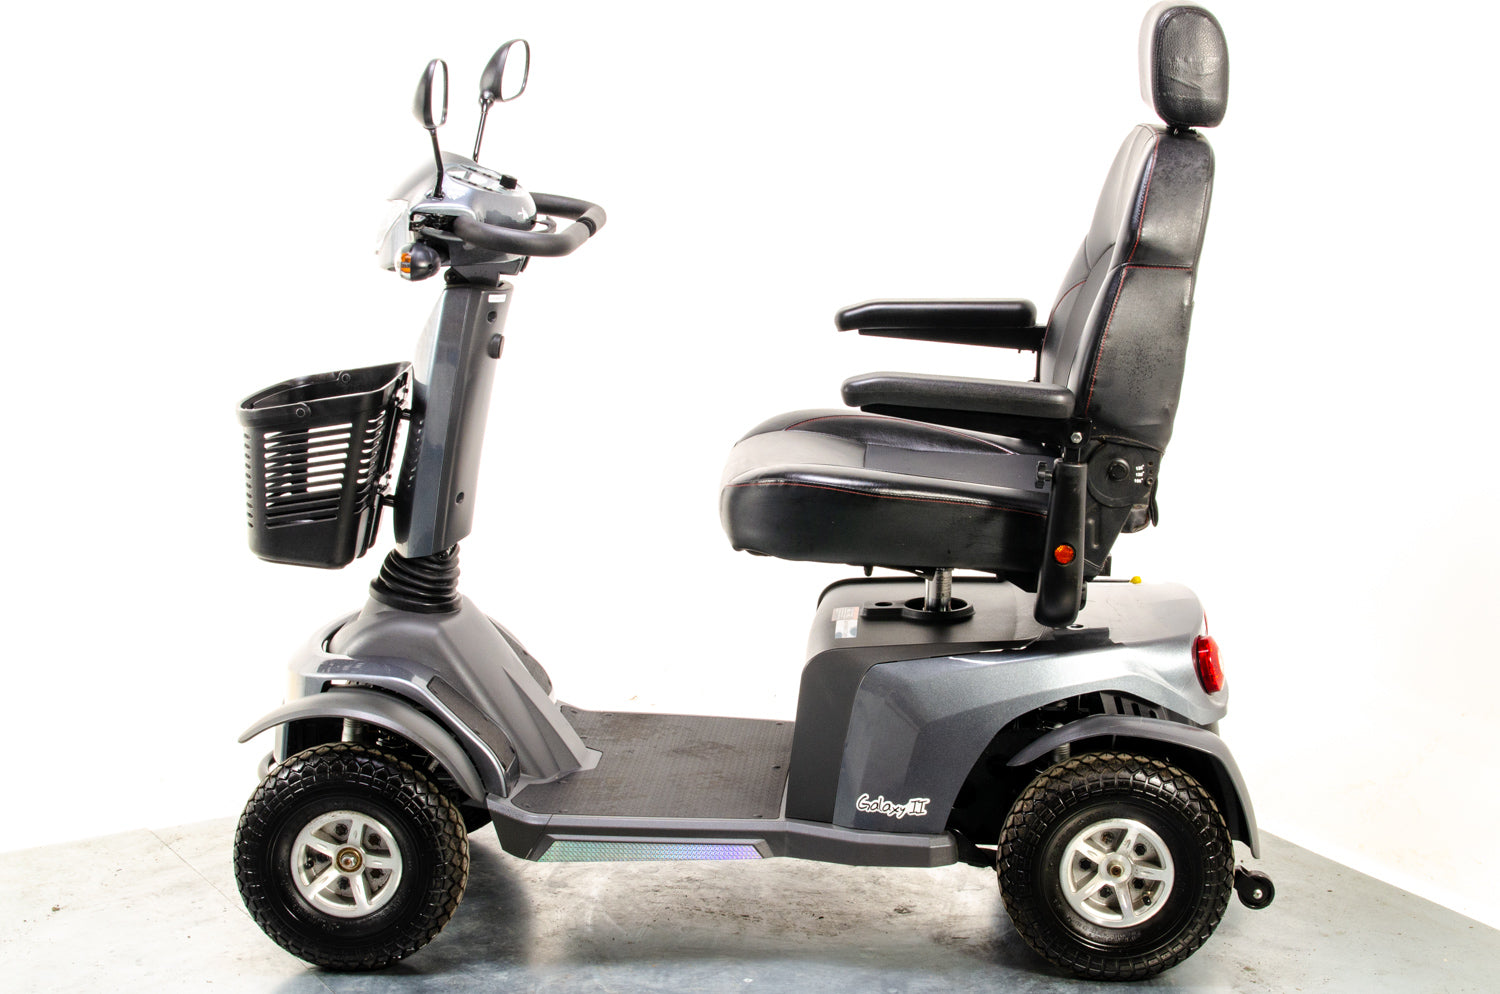 Excel Galaxy II All-Terrain Off-Road Used Mobility Scooter 8mph Van Os Large Comfy Class 3 Road Legal 13077